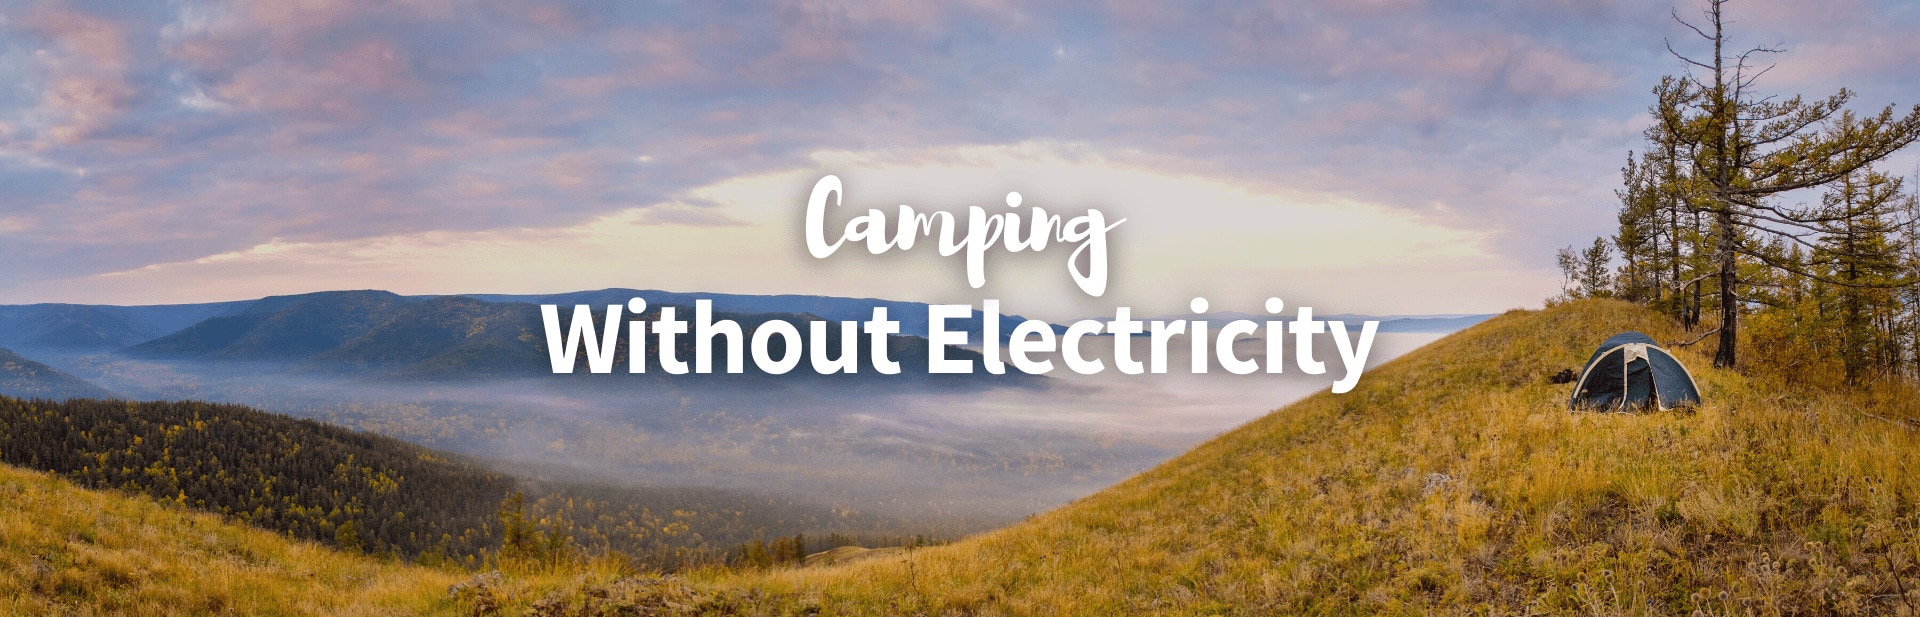 Camping Without Electricity